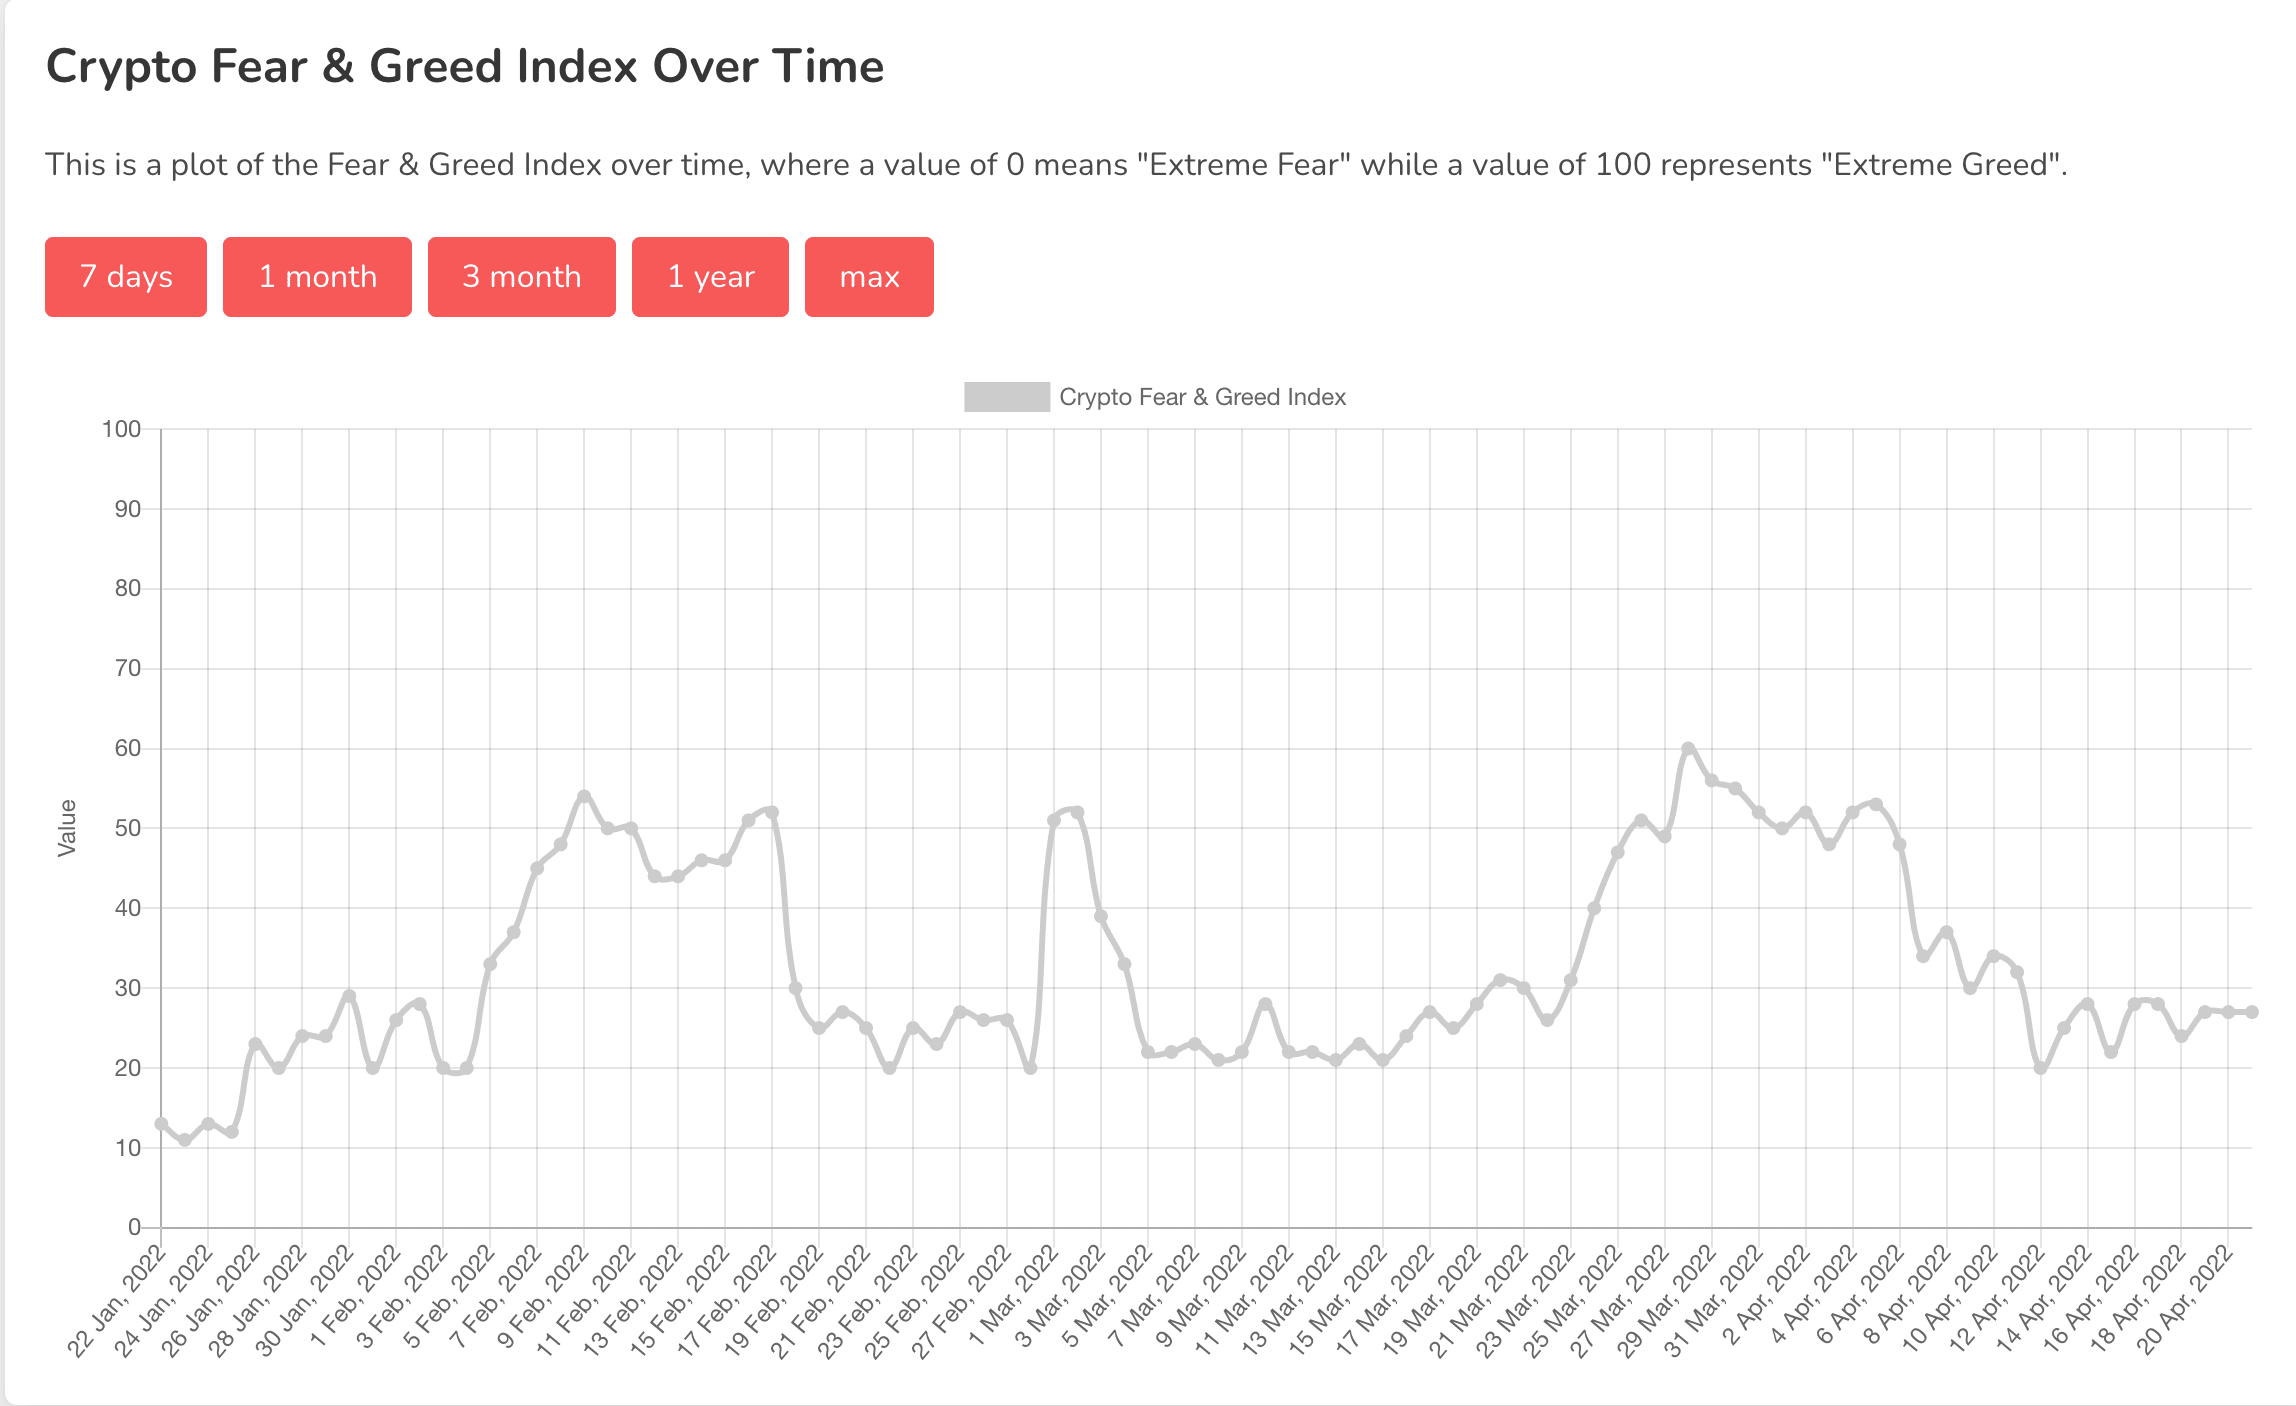 Crypto Fear & Greed Index historical data over the last three months